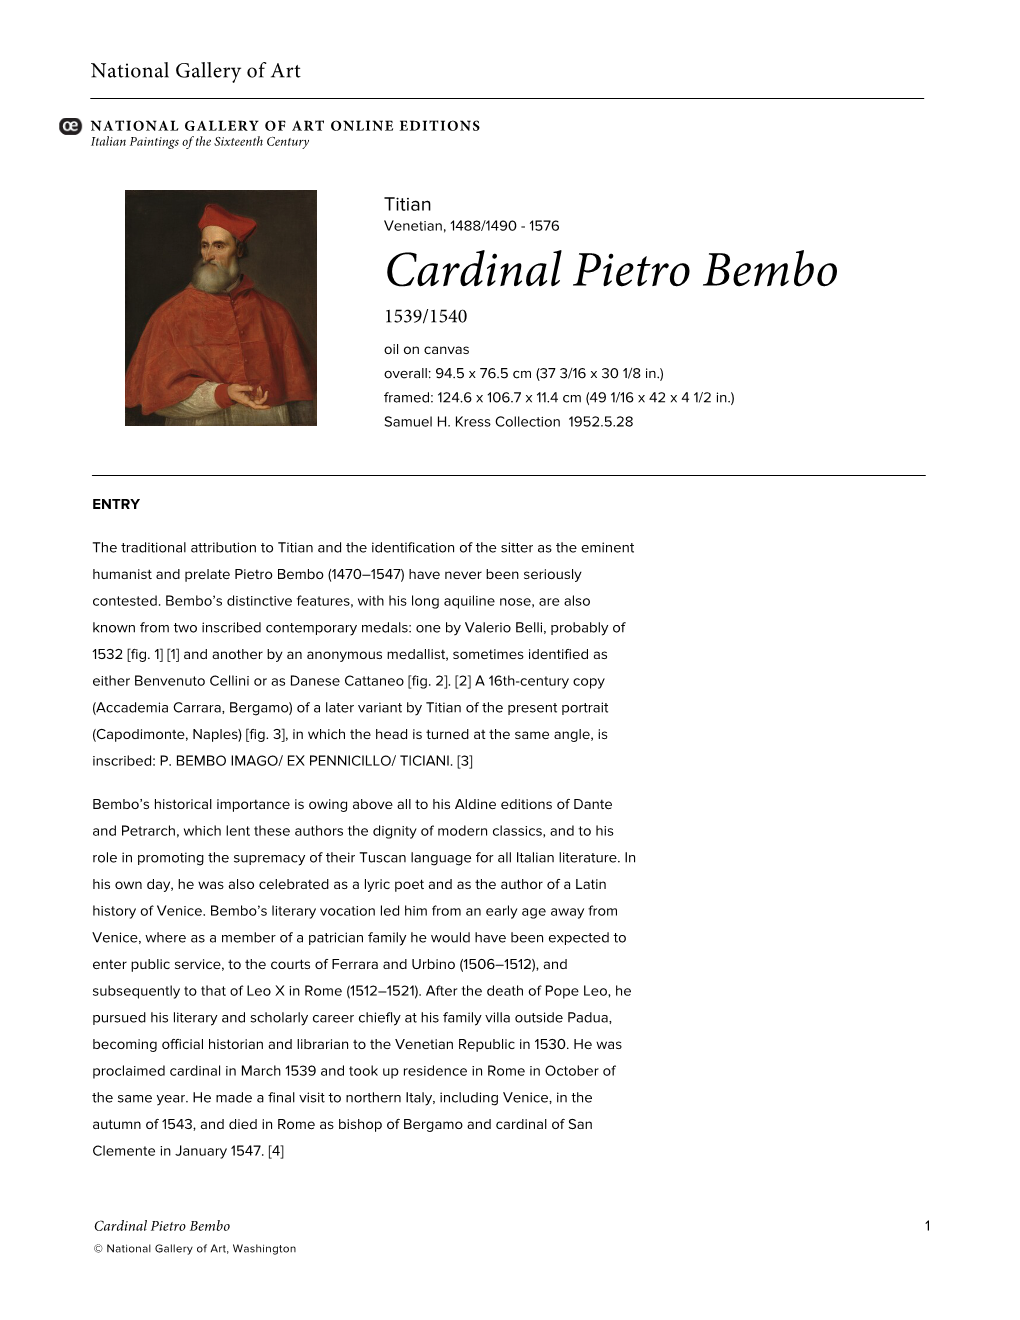 Cardinal Pietro Bembo 1539/1540 Oil on Canvas Overall: 94.5 X 76.5 Cm (37 3/16 X 30 1/8 In.) Framed: 124.6 X 106.7 X 11.4 Cm (49 1/16 X 42 X 4 1/2 In.) Samuel H